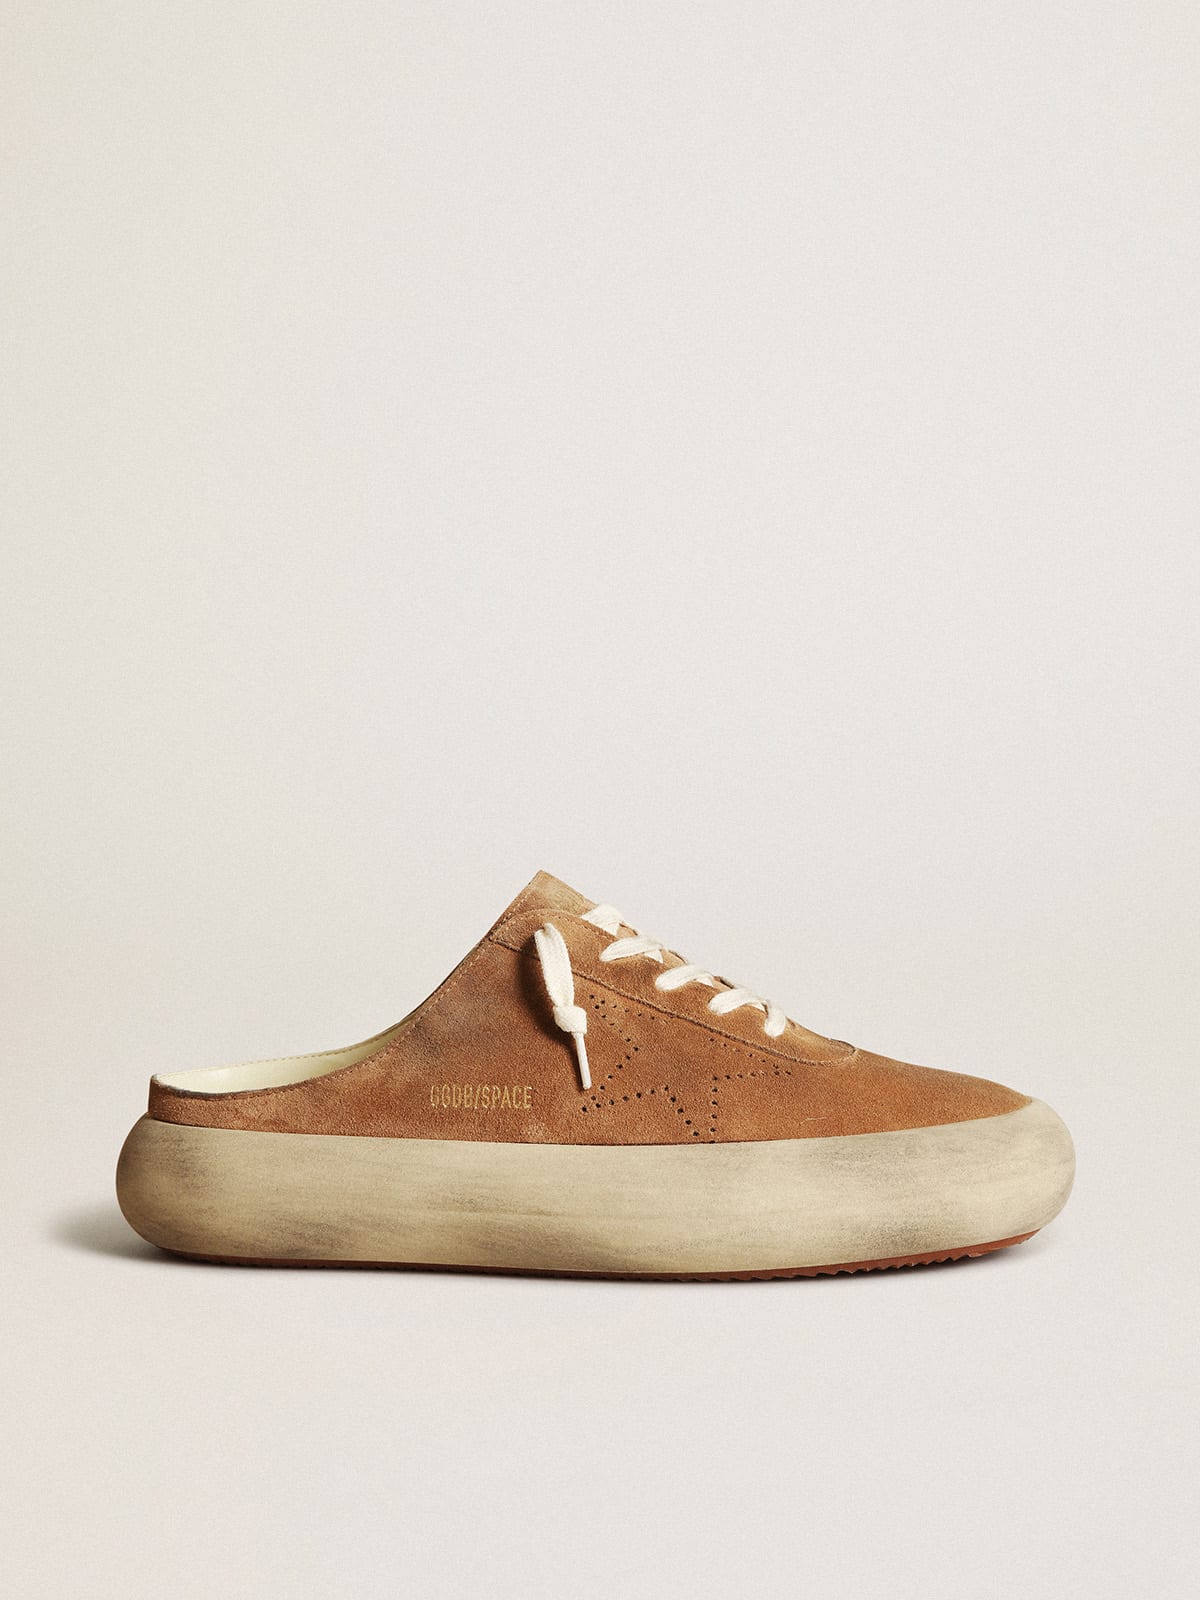 Men's Space-Star Sabots in tobacco suede with perforated star